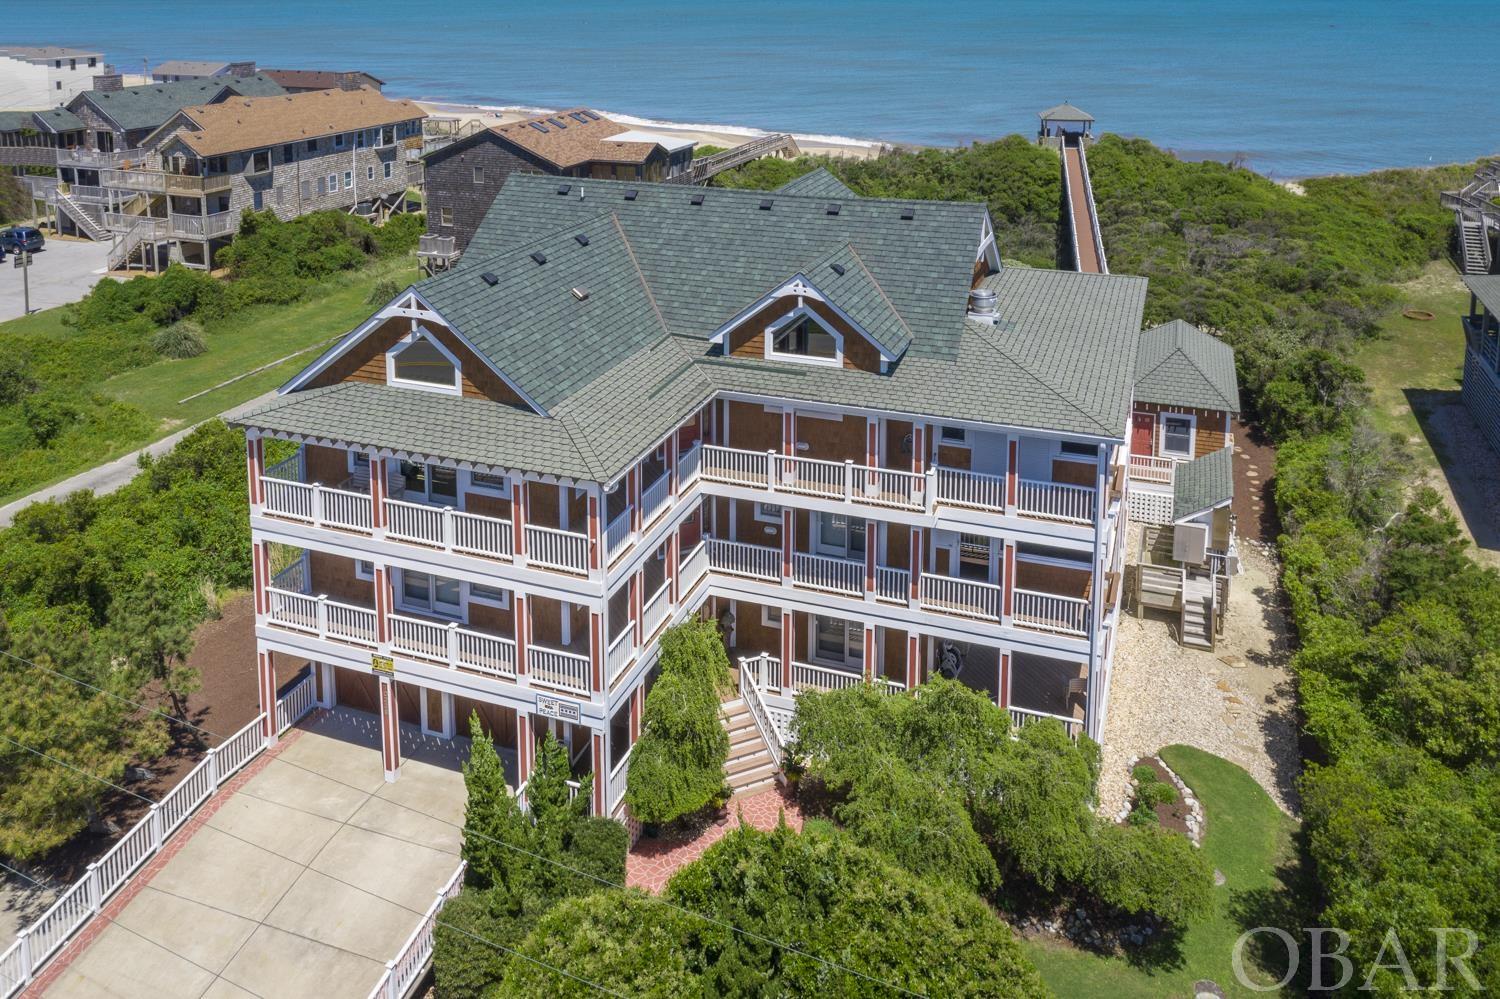 10339 Old Oregon Inlet Road, Nags Head, NC 27959, 8 Bedrooms Bedrooms, ,8 BathroomsBathrooms,Residential,For sale,Old Oregon Inlet Road,125514